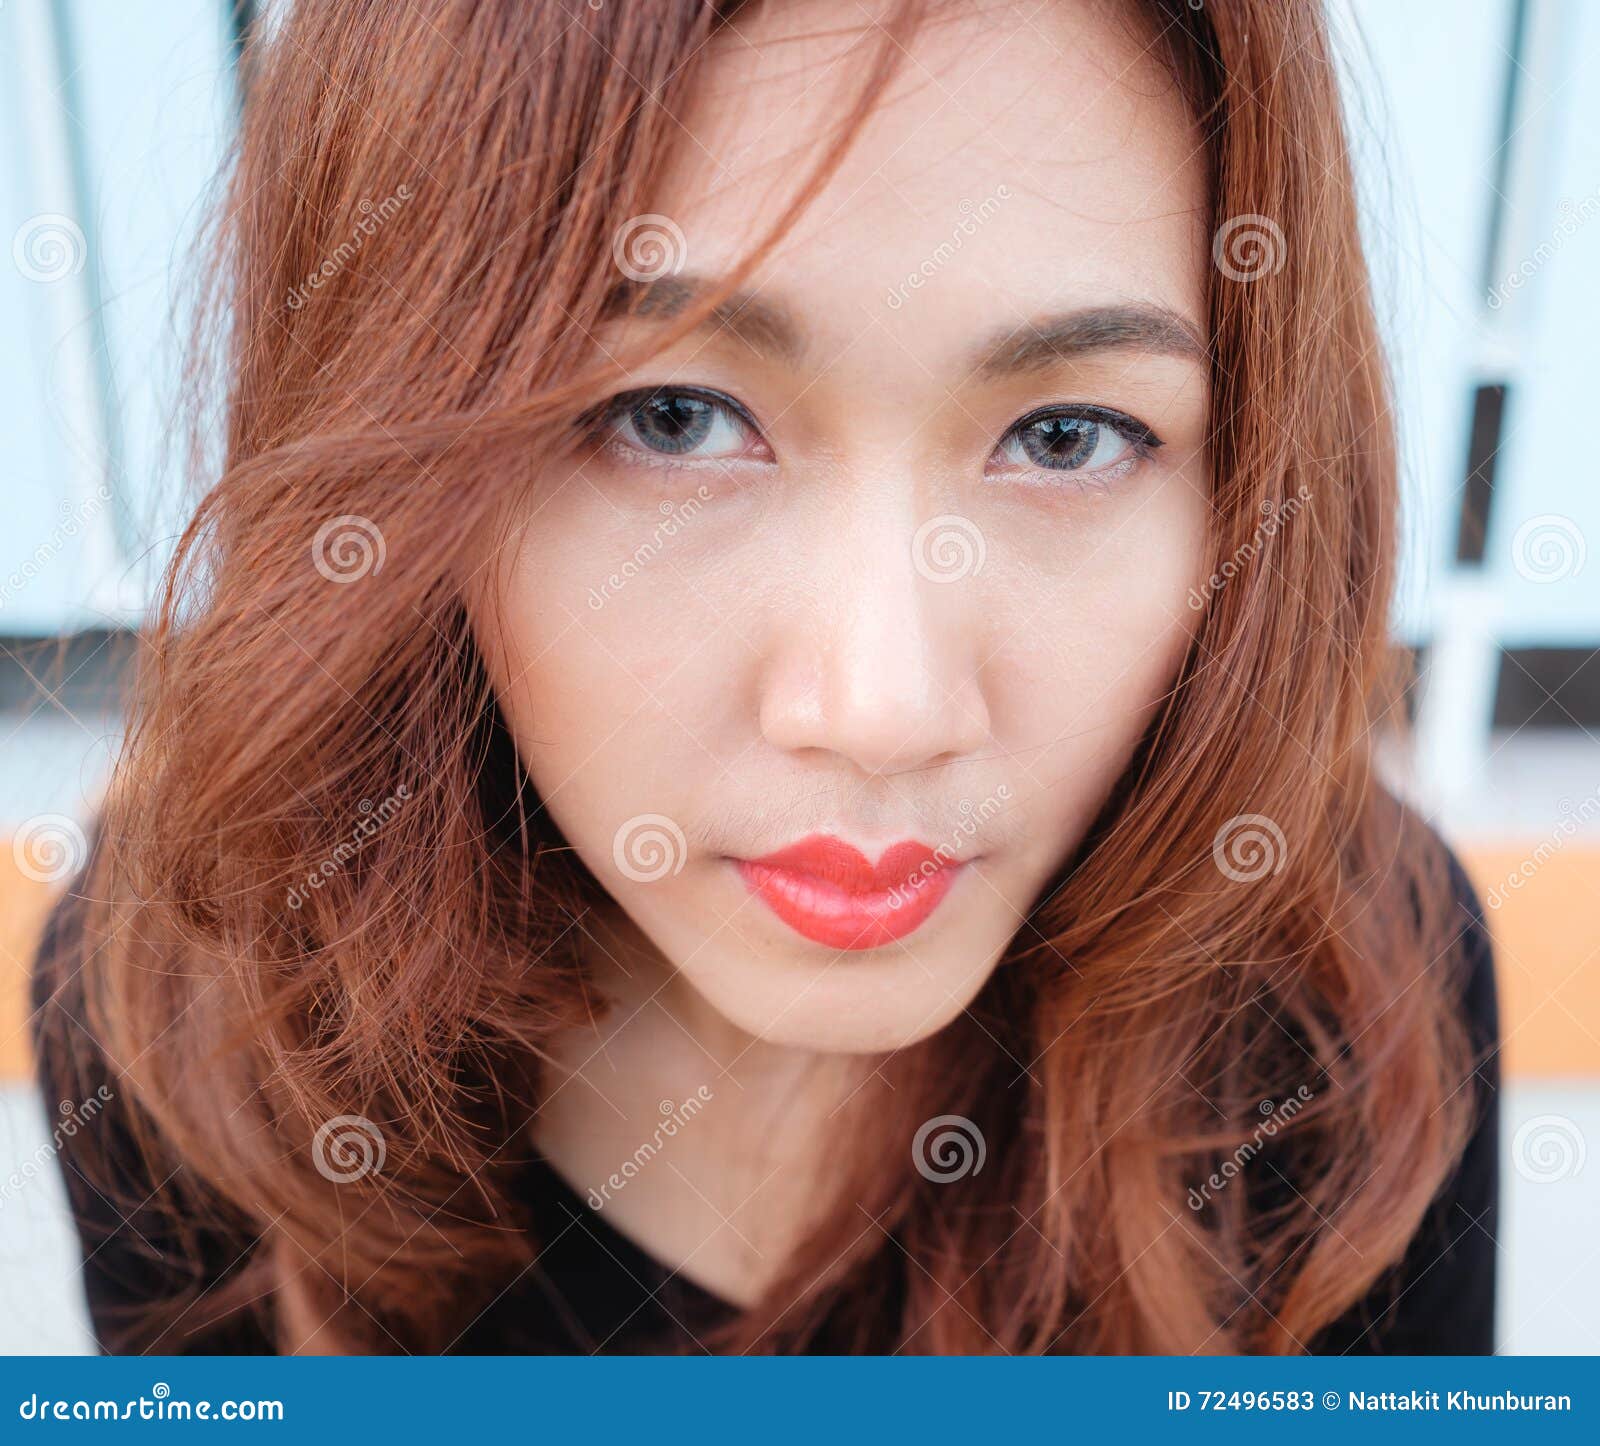 Red Headed Asian – Telegraph